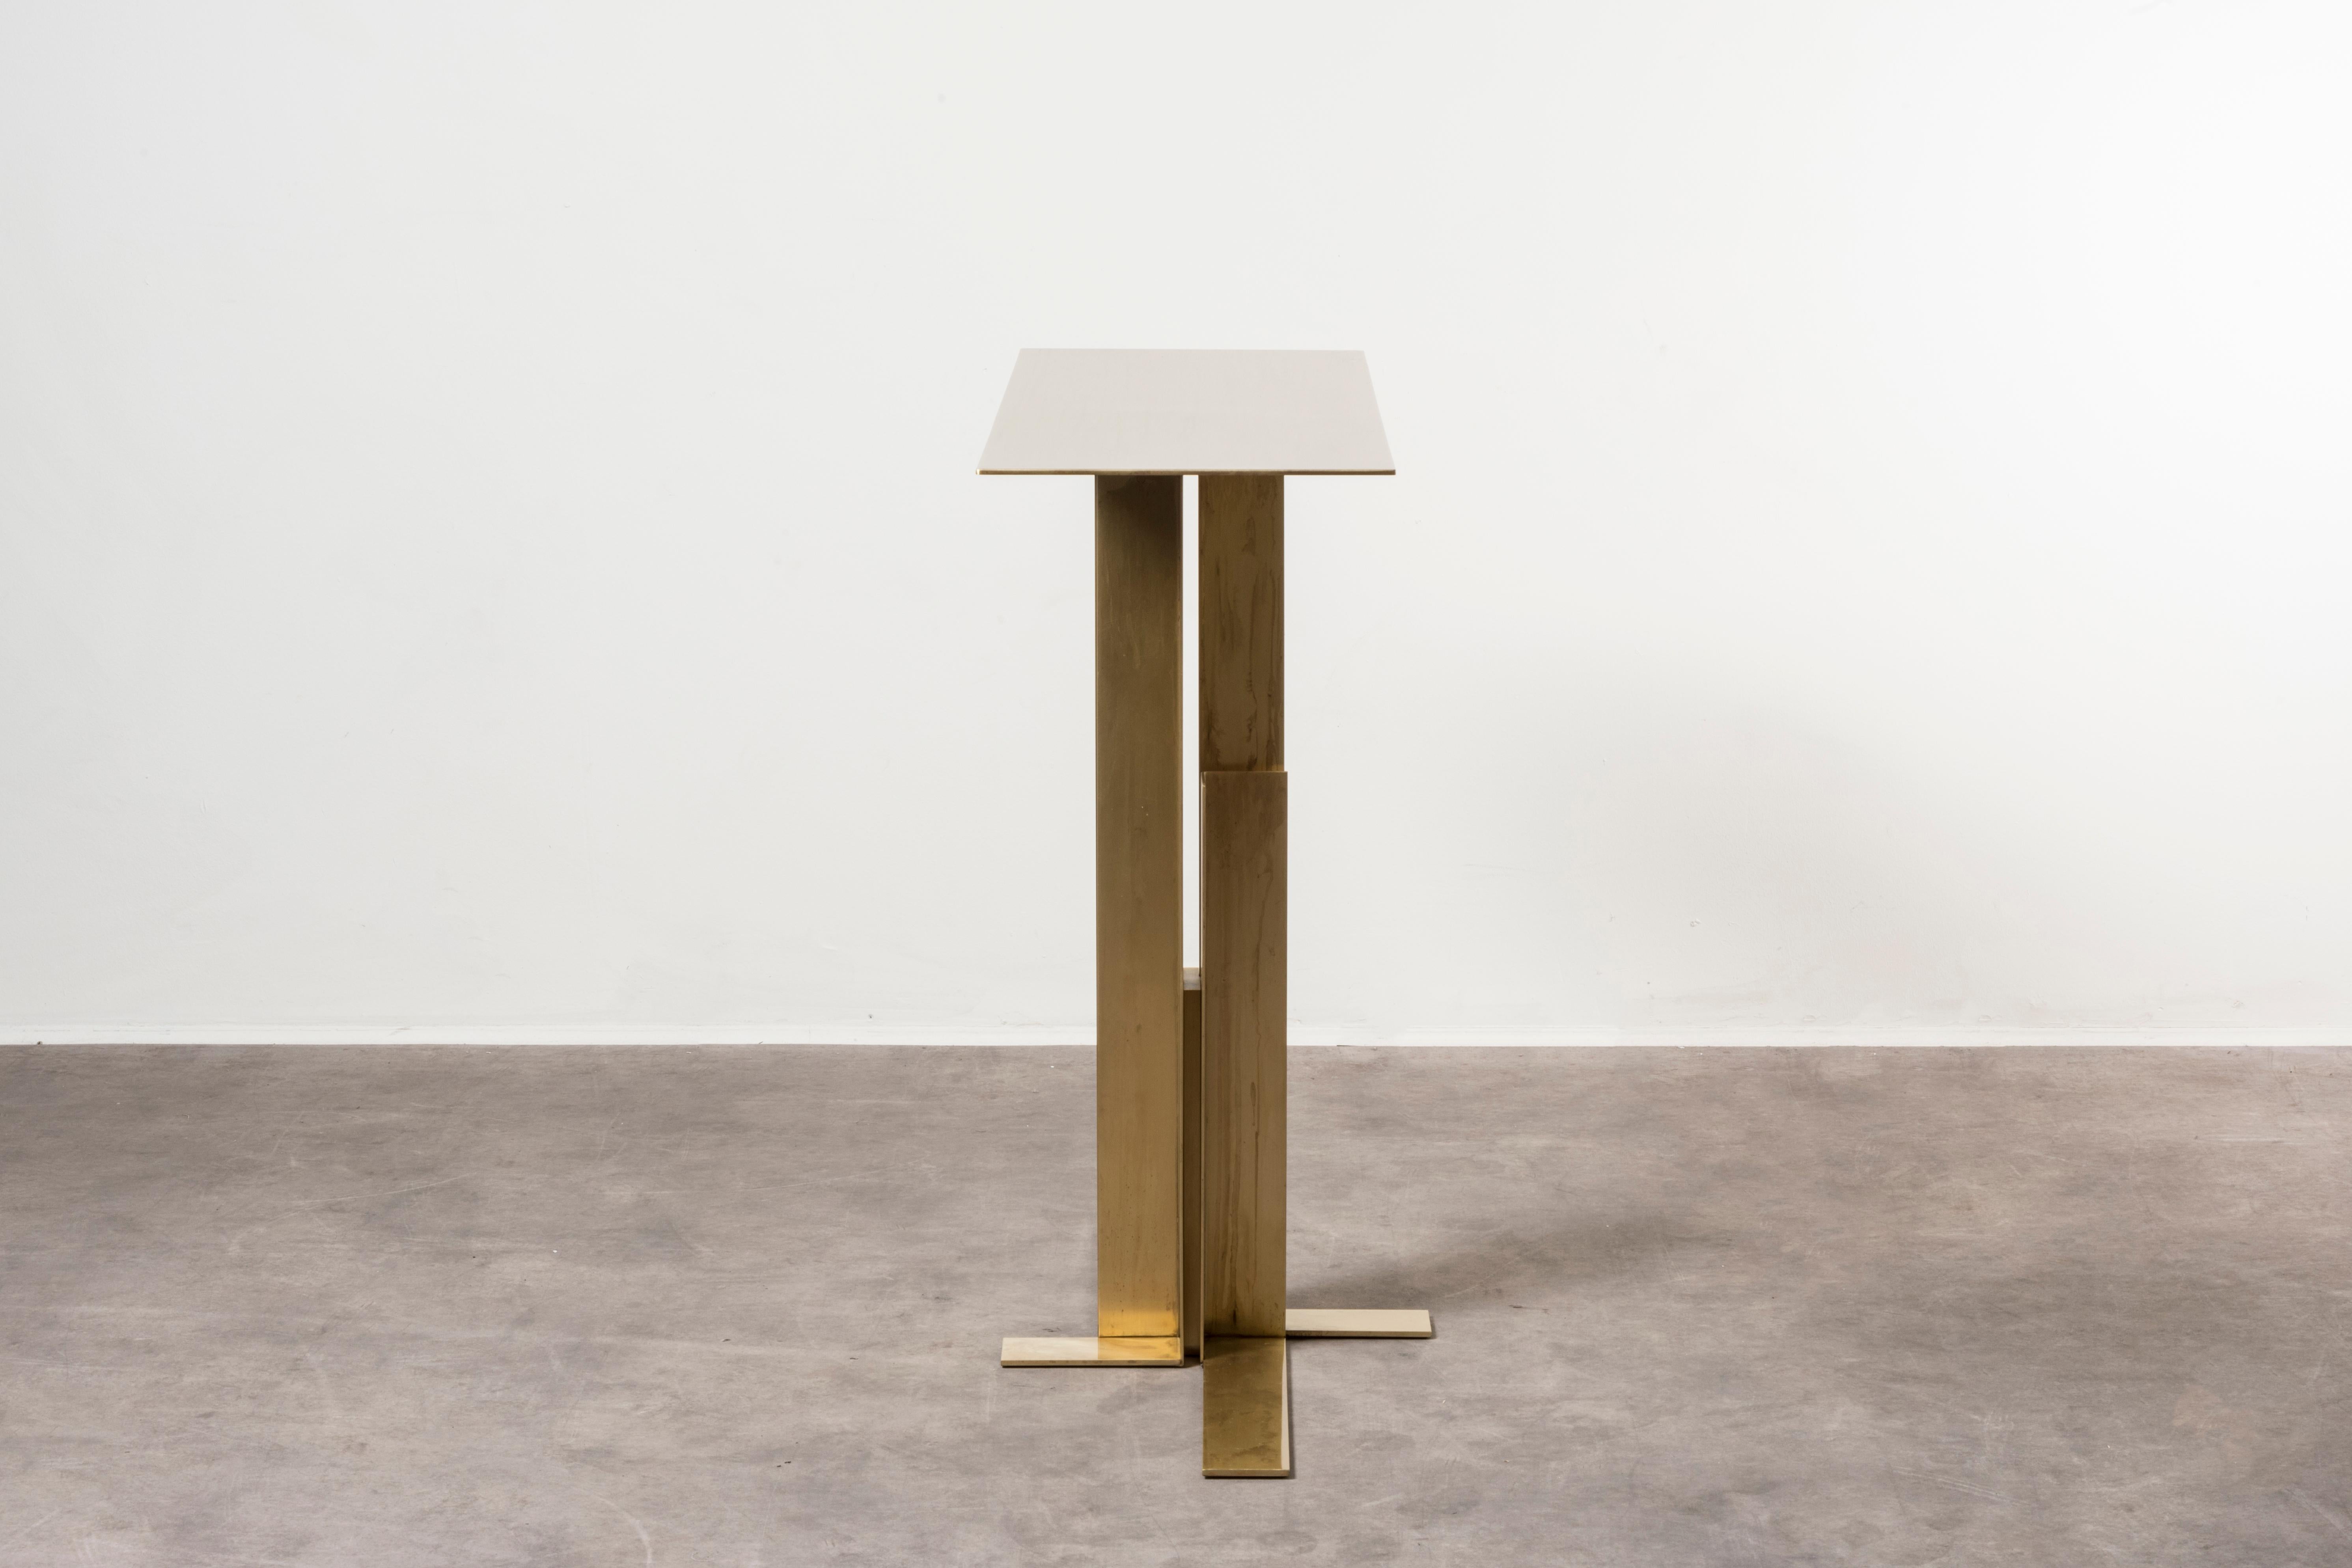 Console by Nicolini Bertocco, Italy, 2019. Nilufar edition. Brass. Measures: 108 x 36 x H 85 cm, 42.5 x 14 x H 33.4 in. The collection is inspired by Mies Van Der Rohe’s famous cruciform column. Like the others pieces by Nicolini Bertocco,